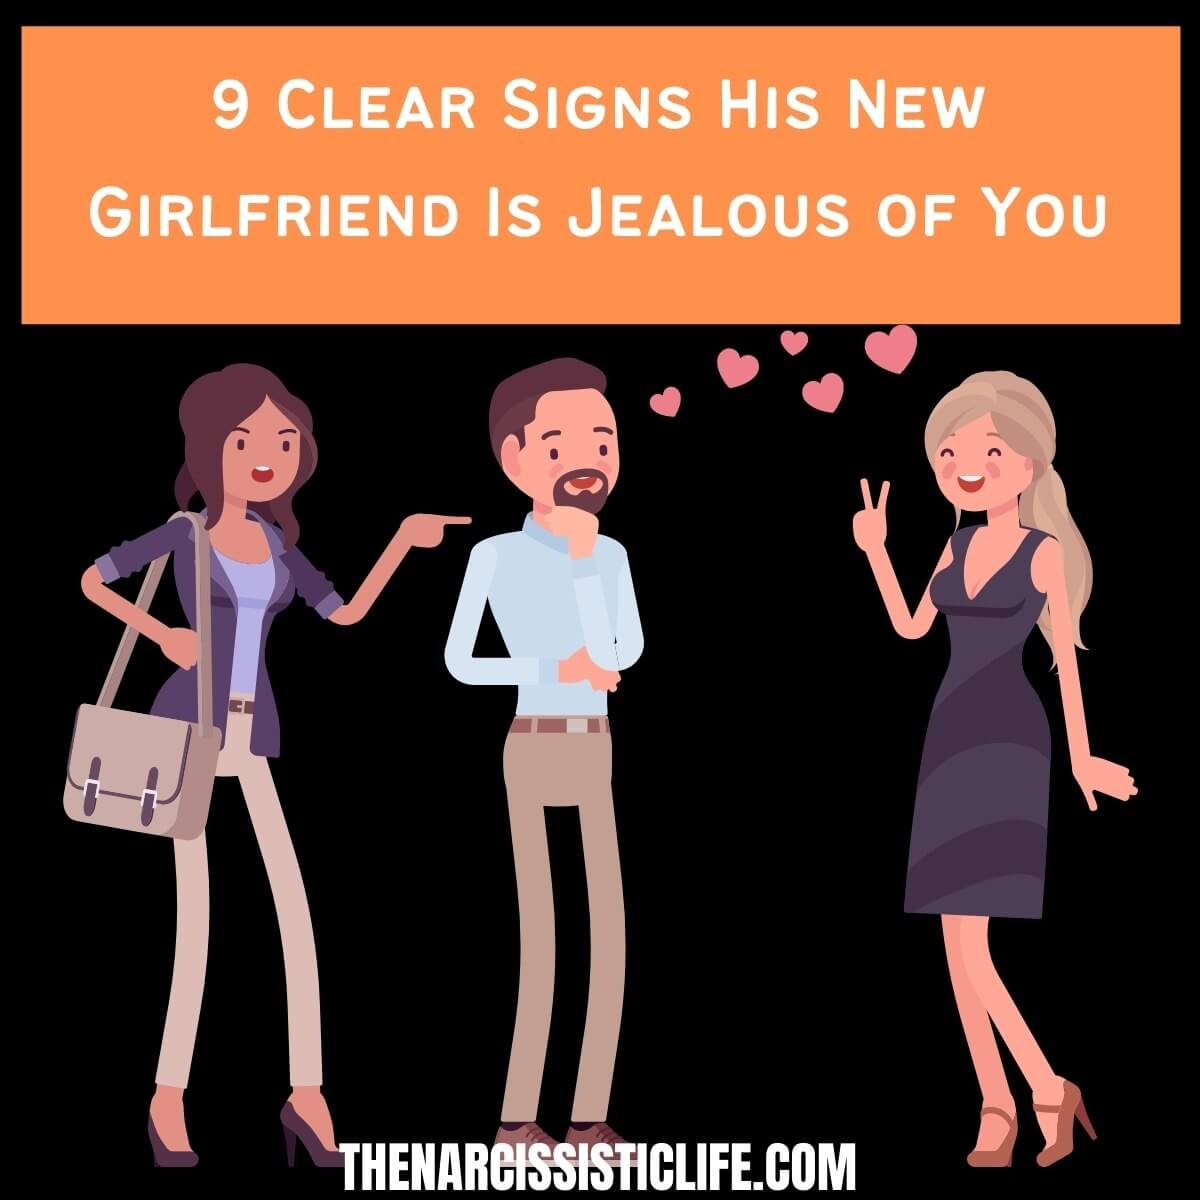 9 Clear Signs His New Girlfriend Is Jealous of You